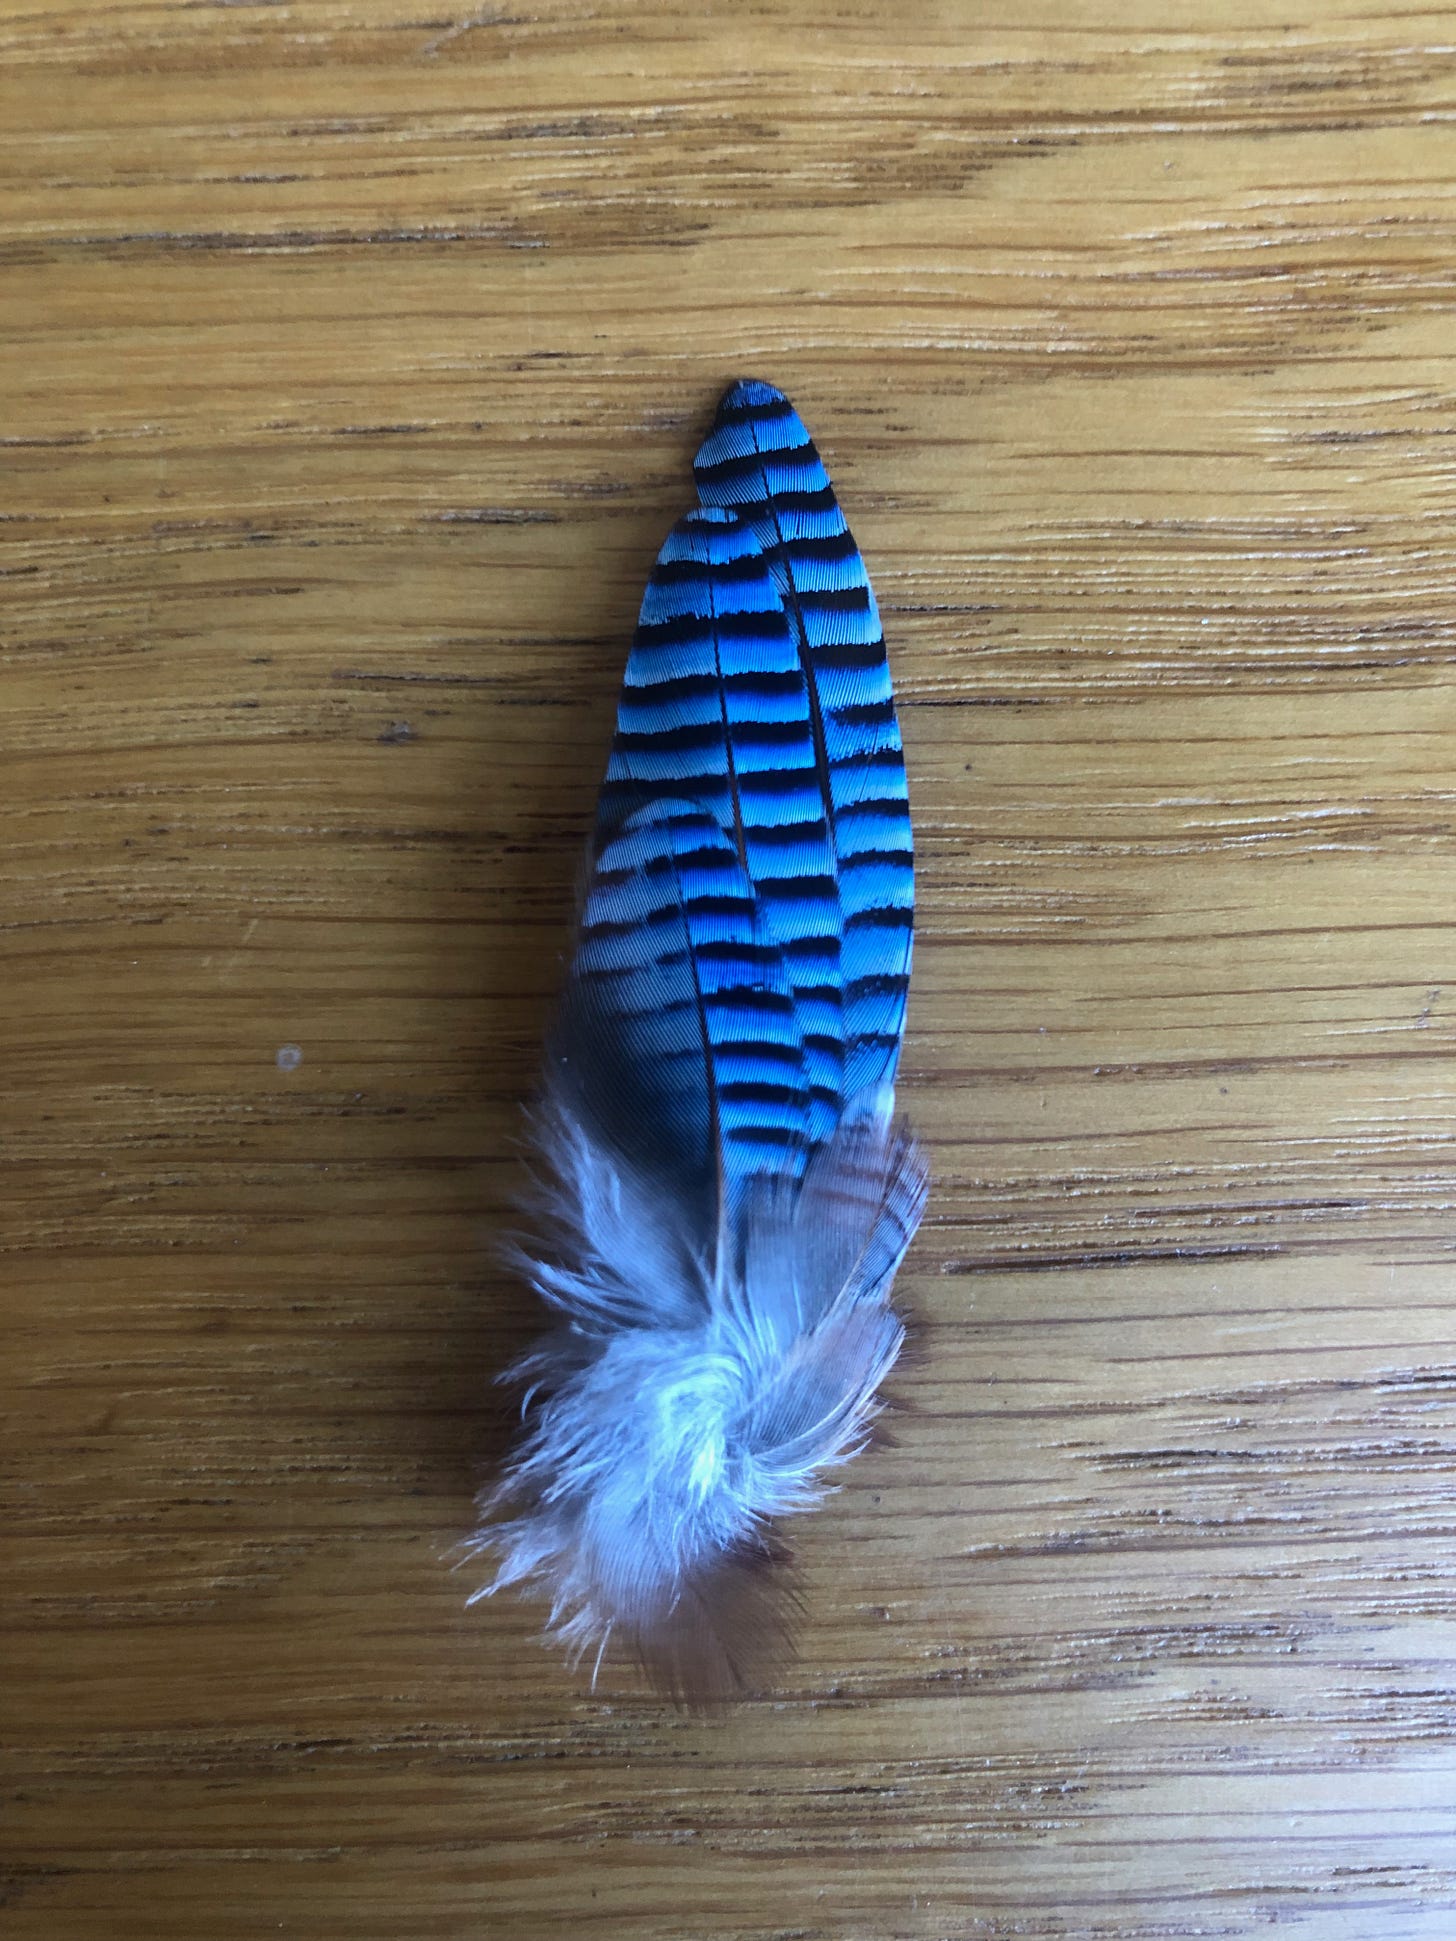 It is in fact a group of three feathers, from their owner's wing untimely ripped. Vibrant sky blue, the feathers have delicate black bars throughout. Fluffy down gathered at the featherbase completes the ensemble.